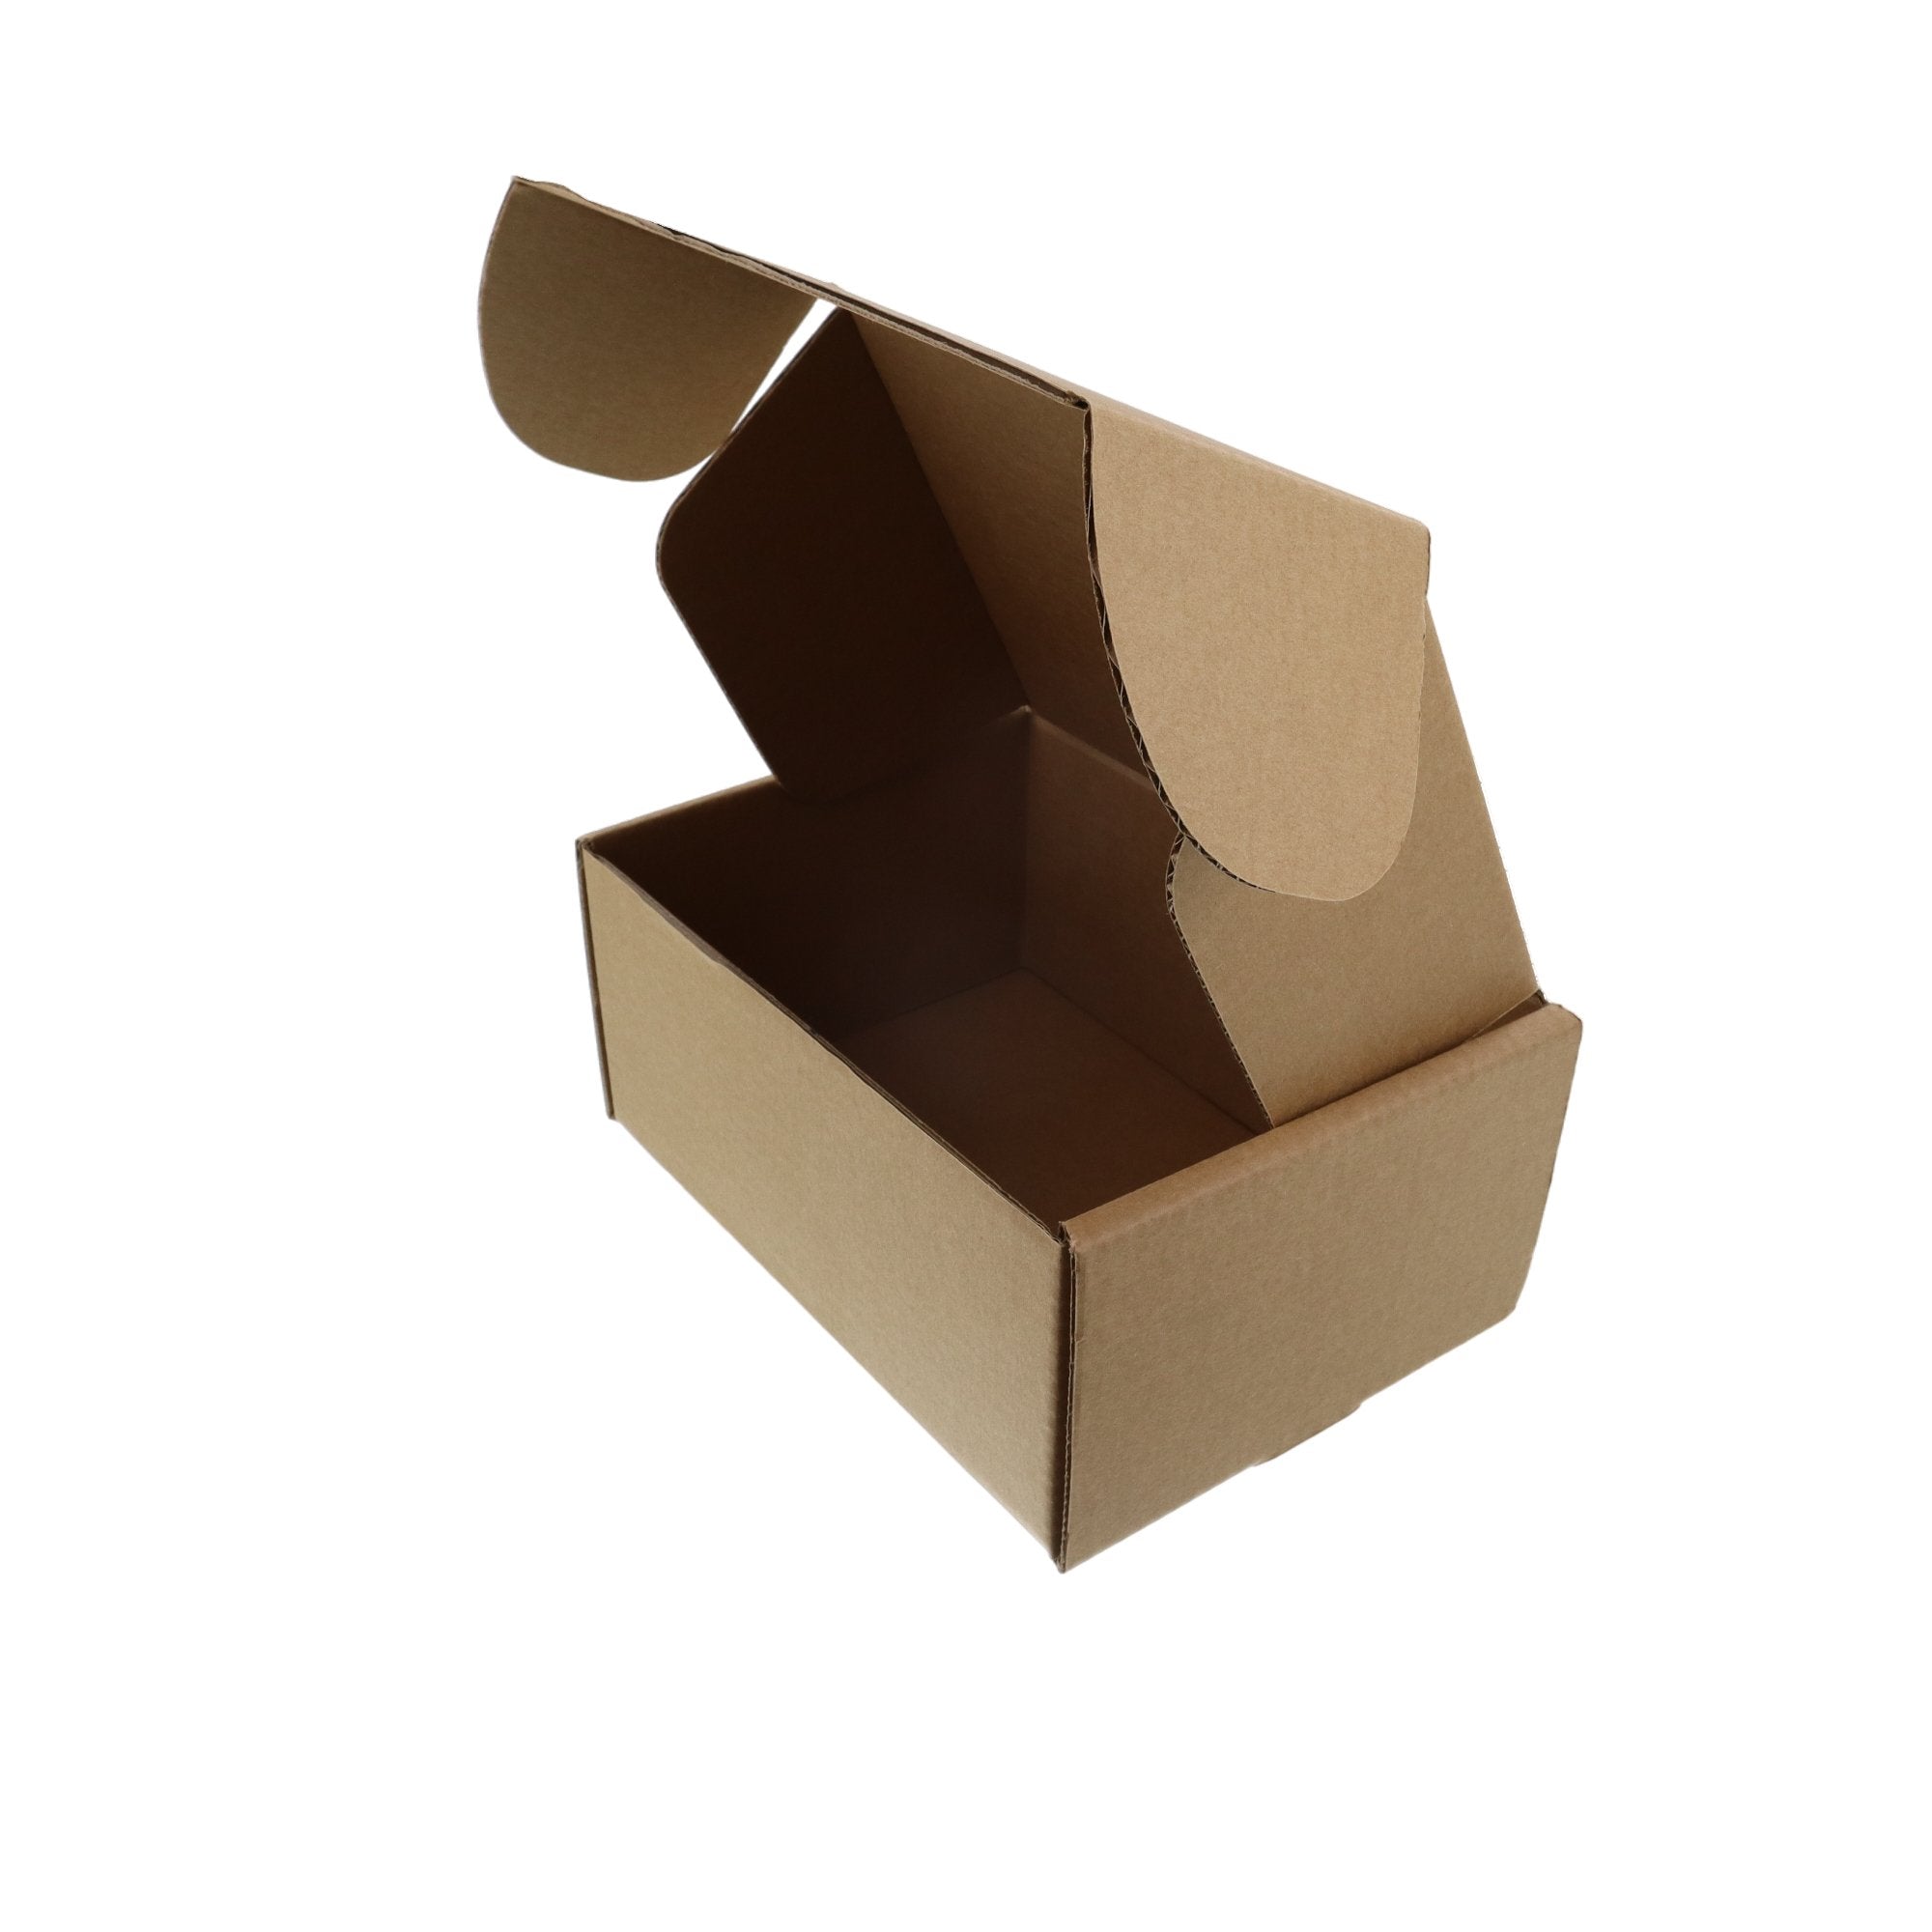 Budget Mailer 1 One Piece Mailing Box [Express Value Buy] - PackQueen